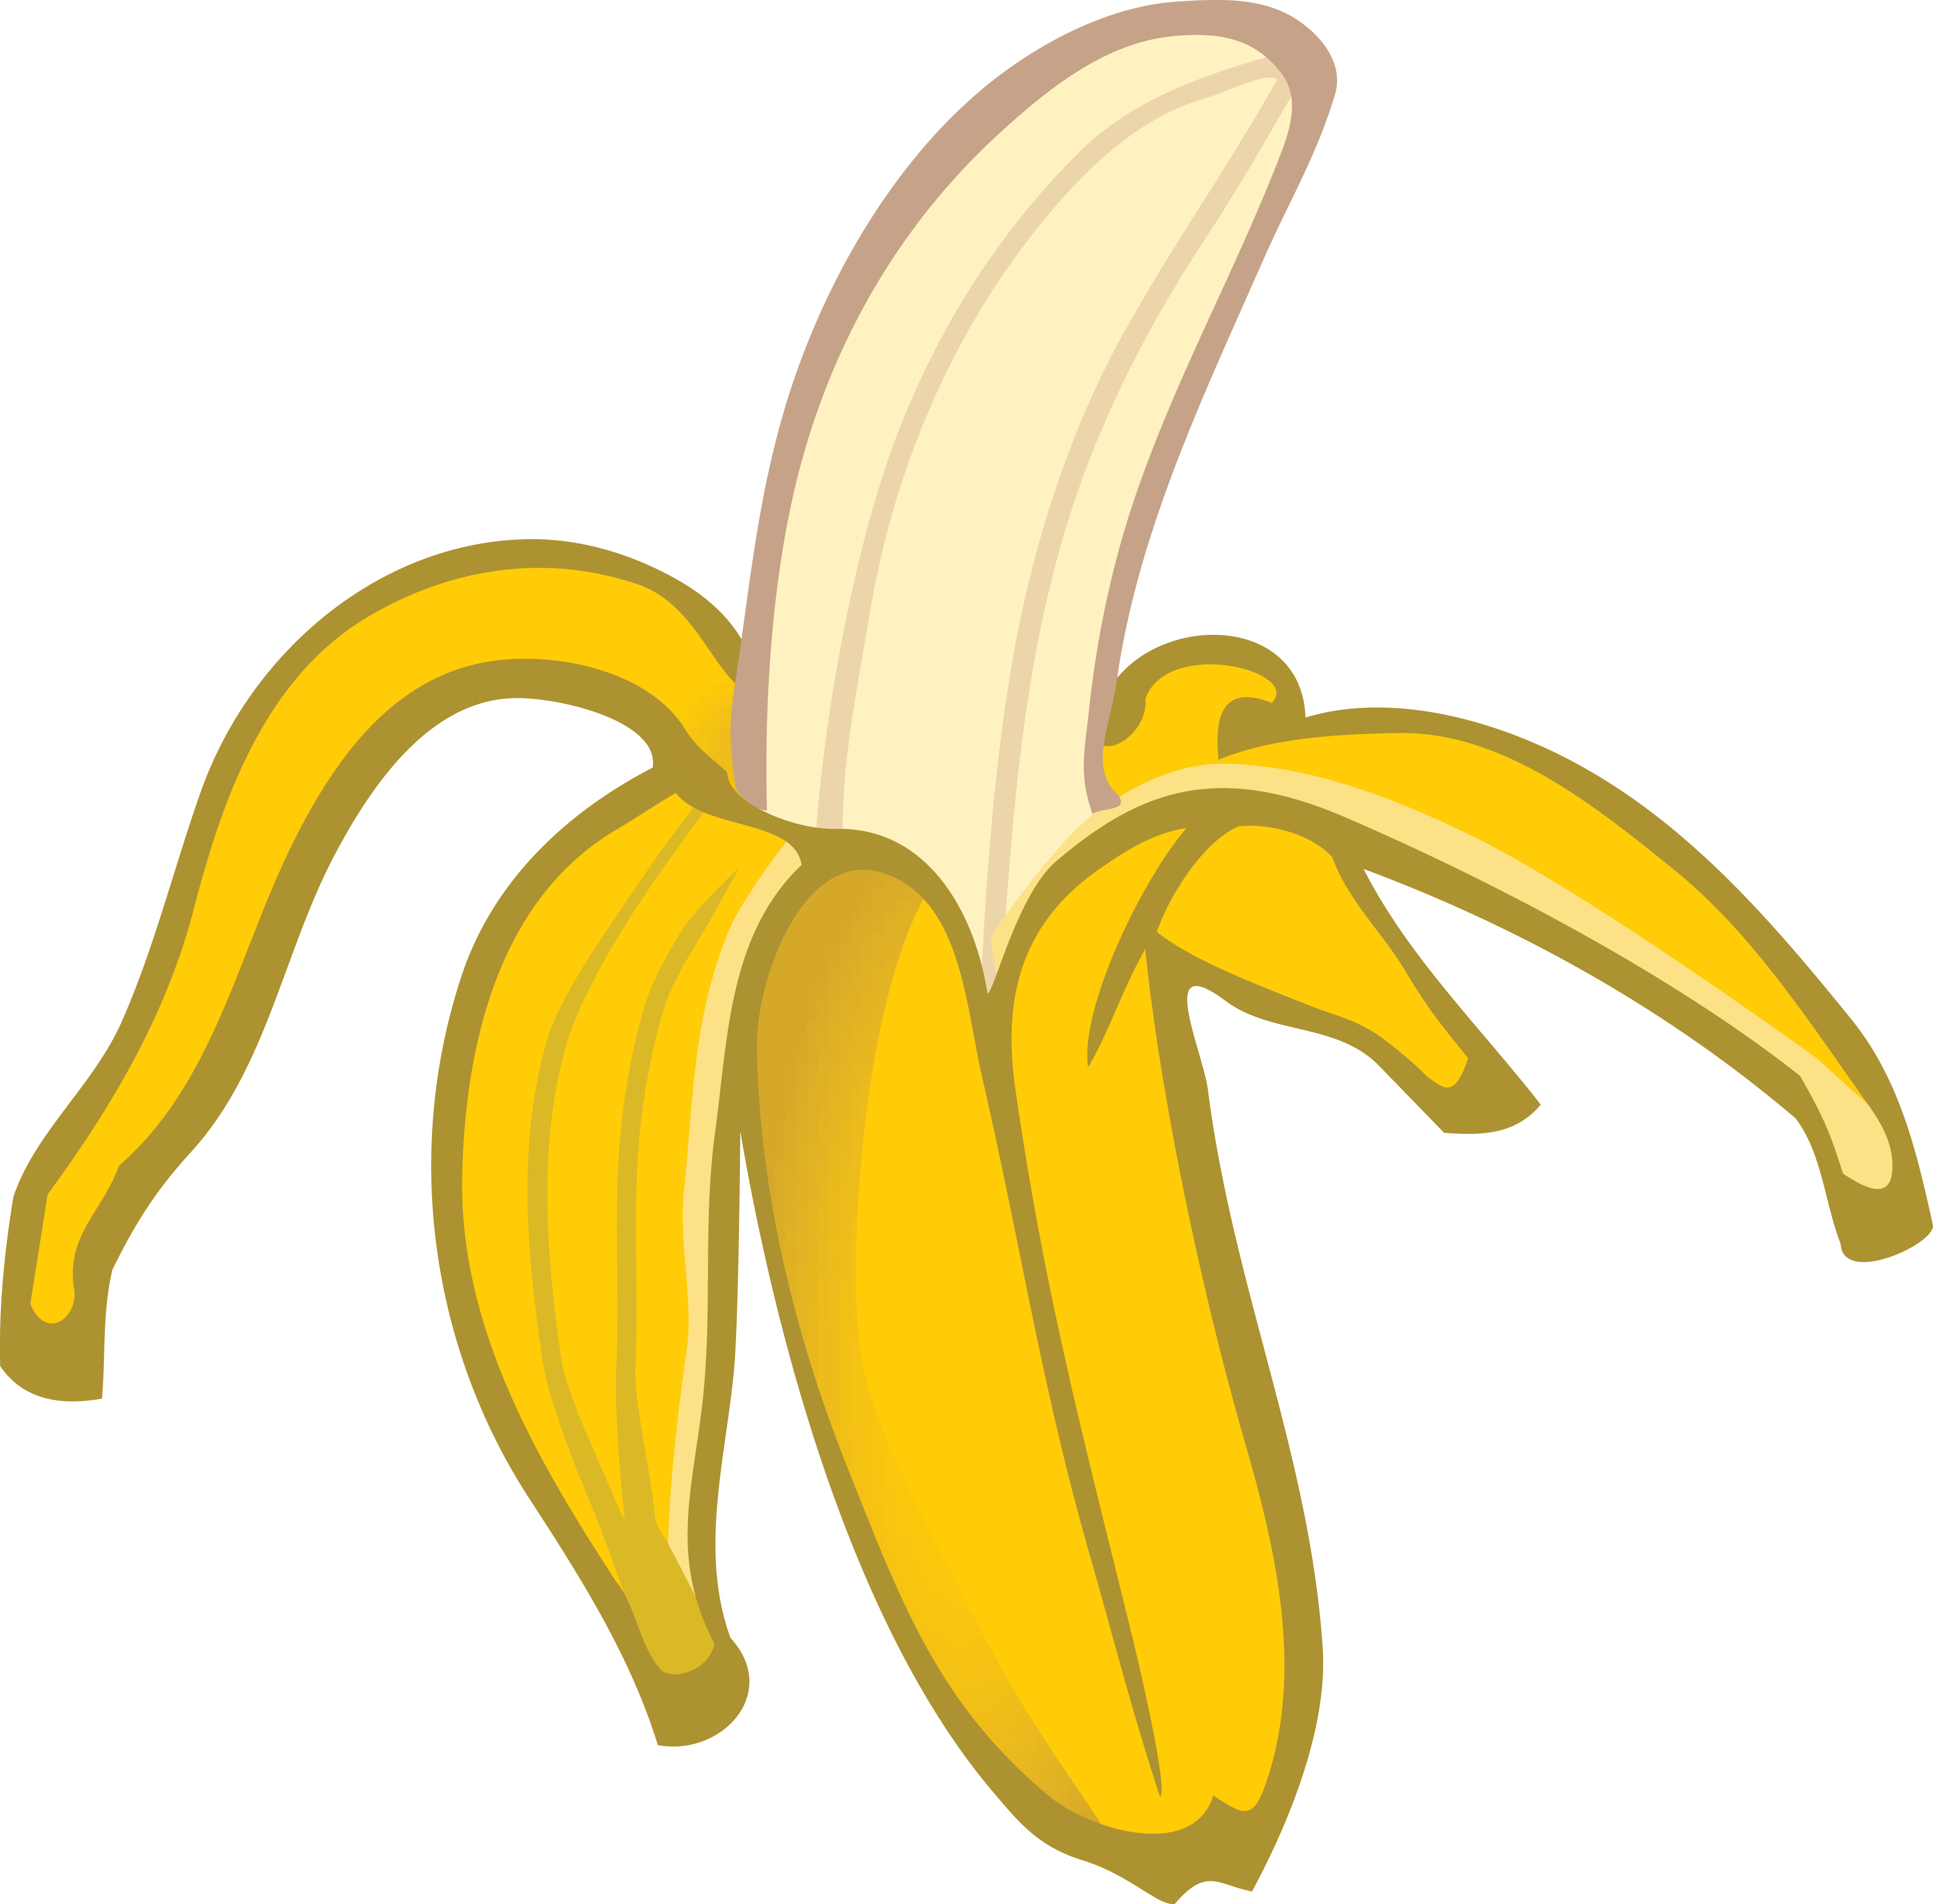 Banana clipart black and whit